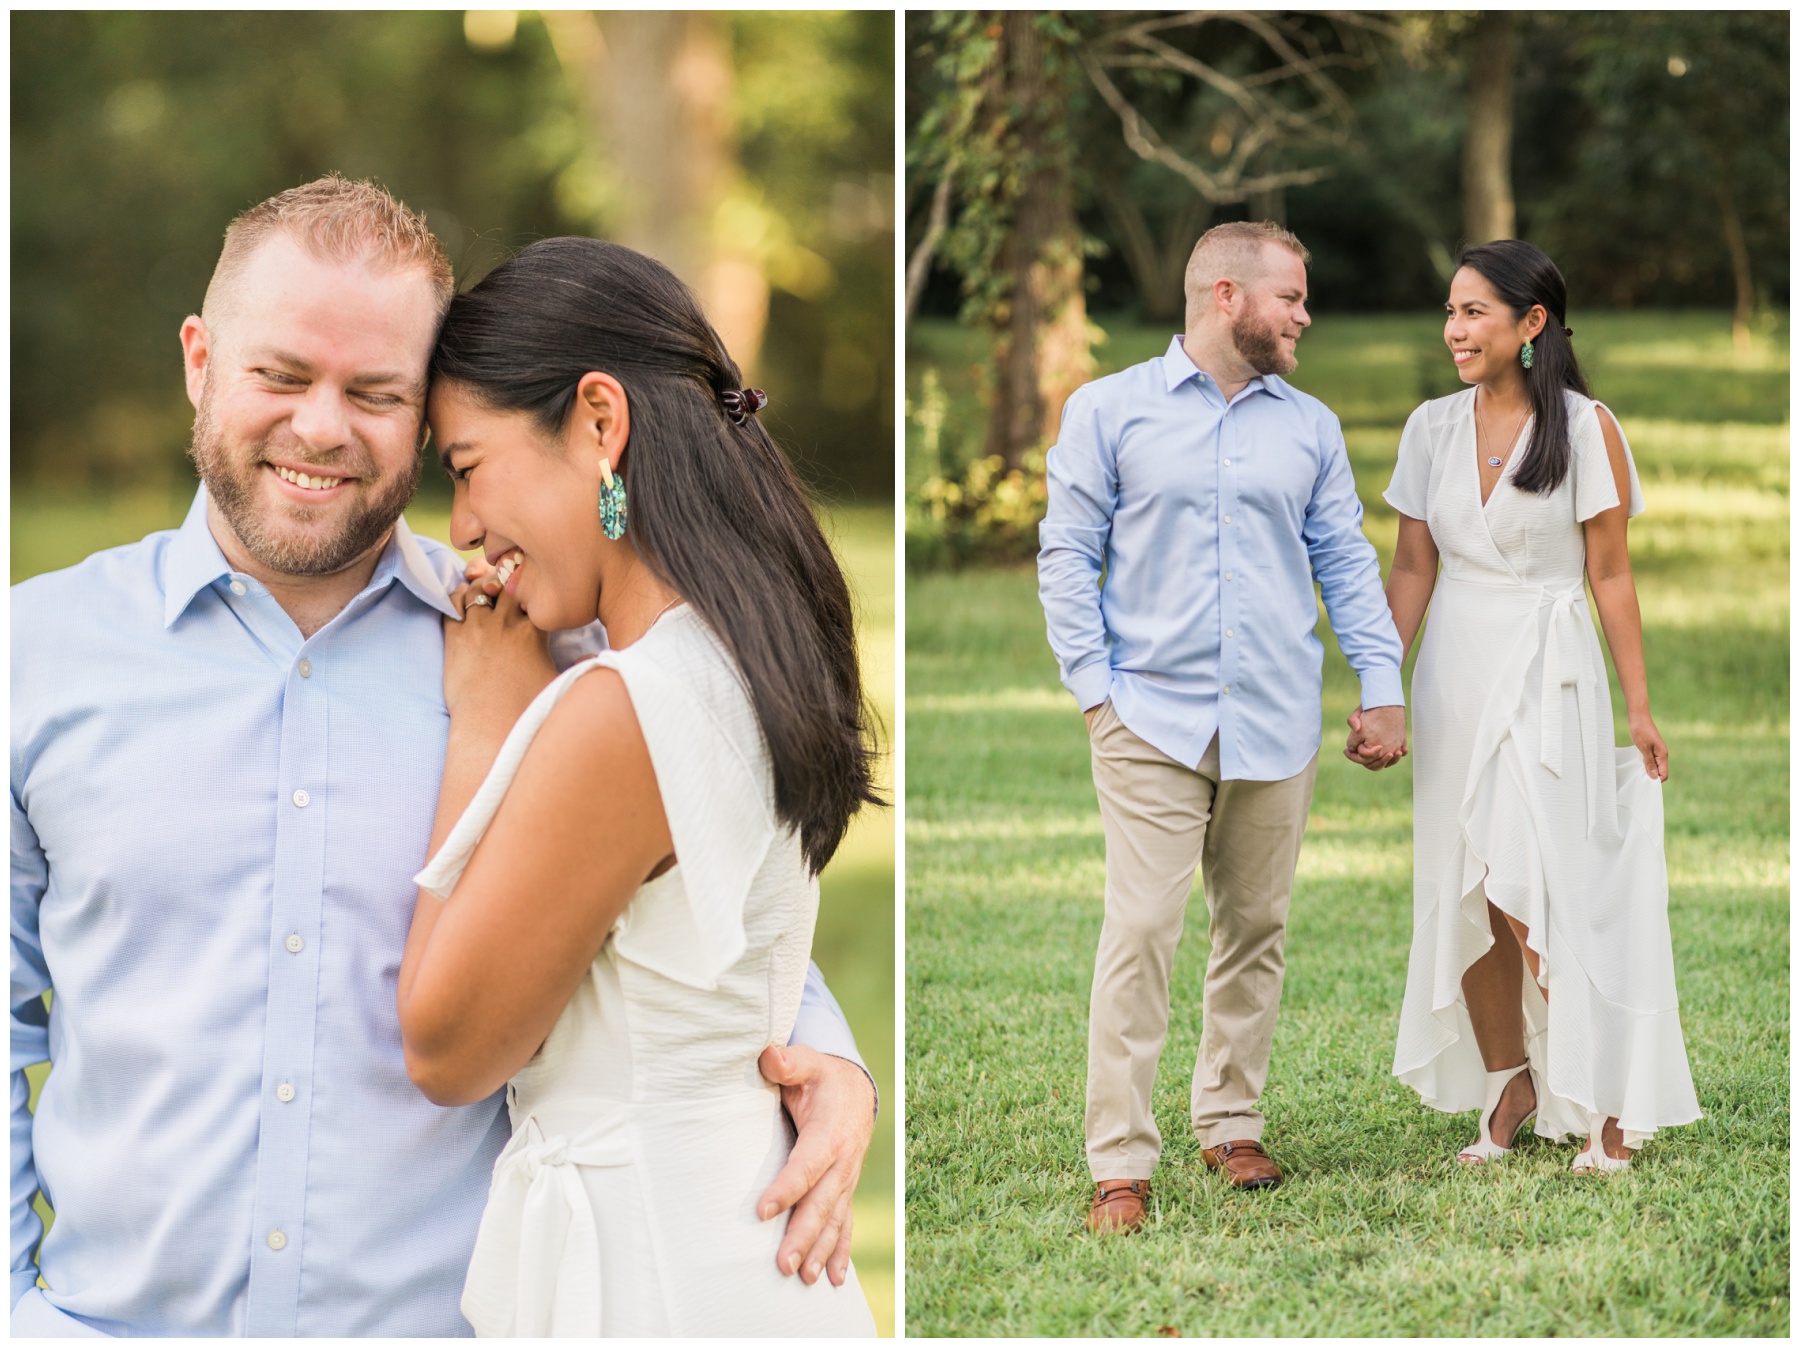 Sunset Engagement Session in Houston